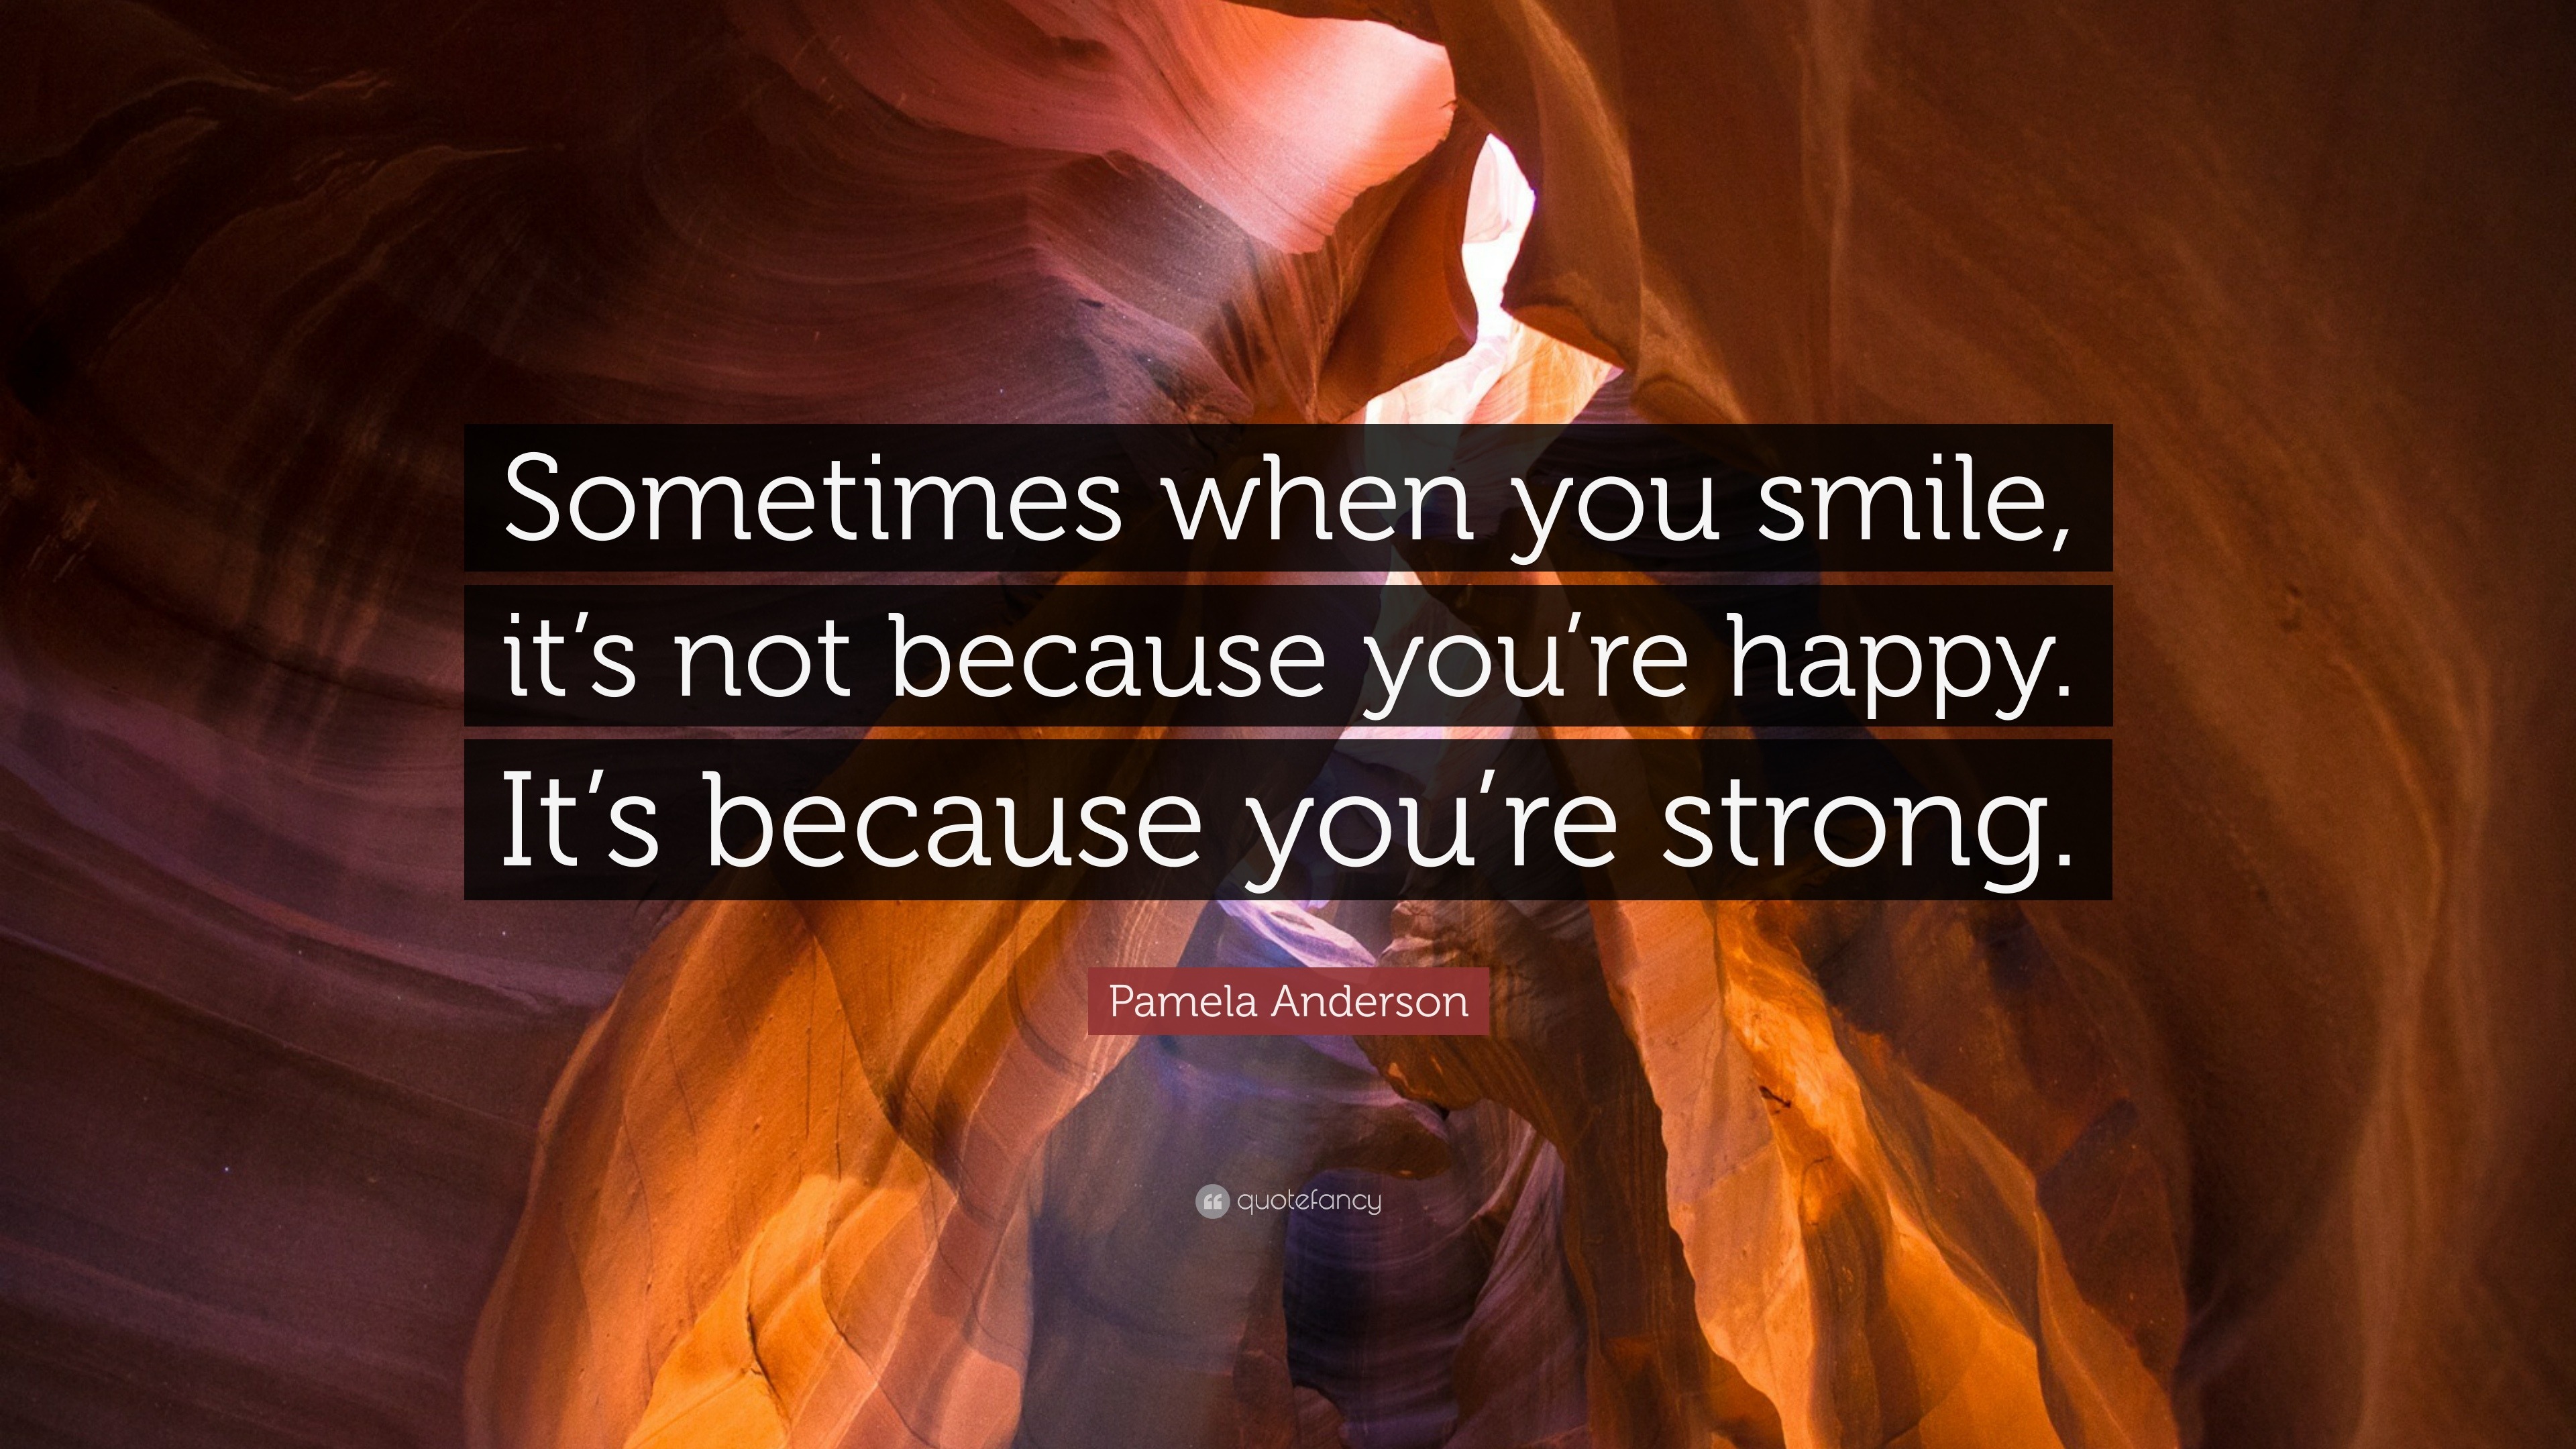 Pamela Anderson Quote: “Sometimes when you smile, it’s not because you ...